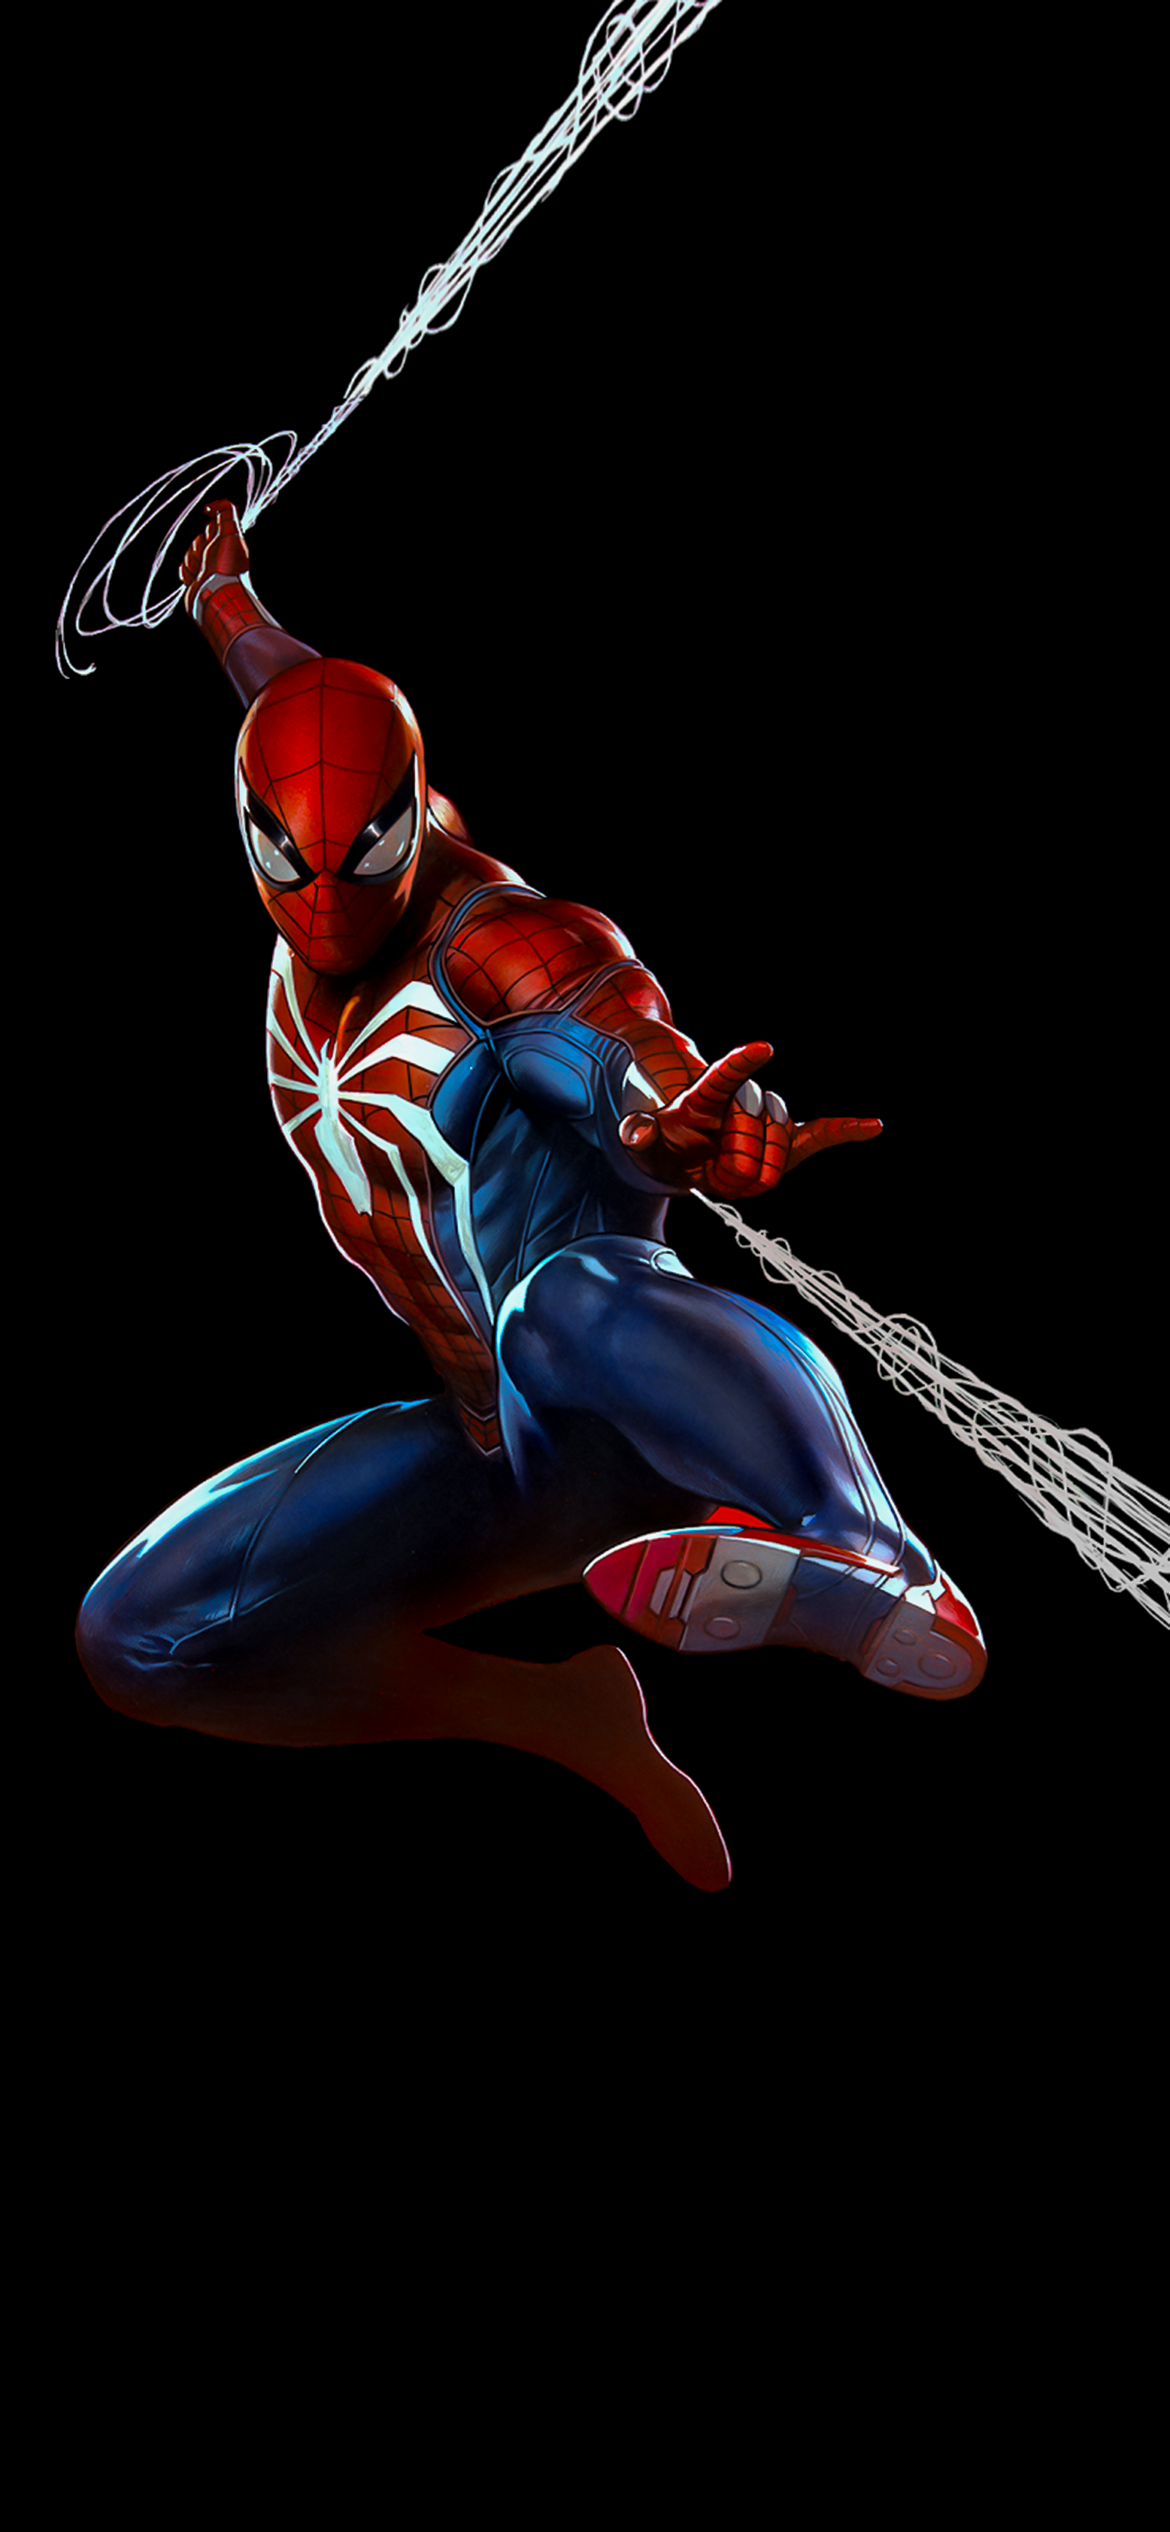 iOS 16 really complements these wallpapers  rSpidermanPS4